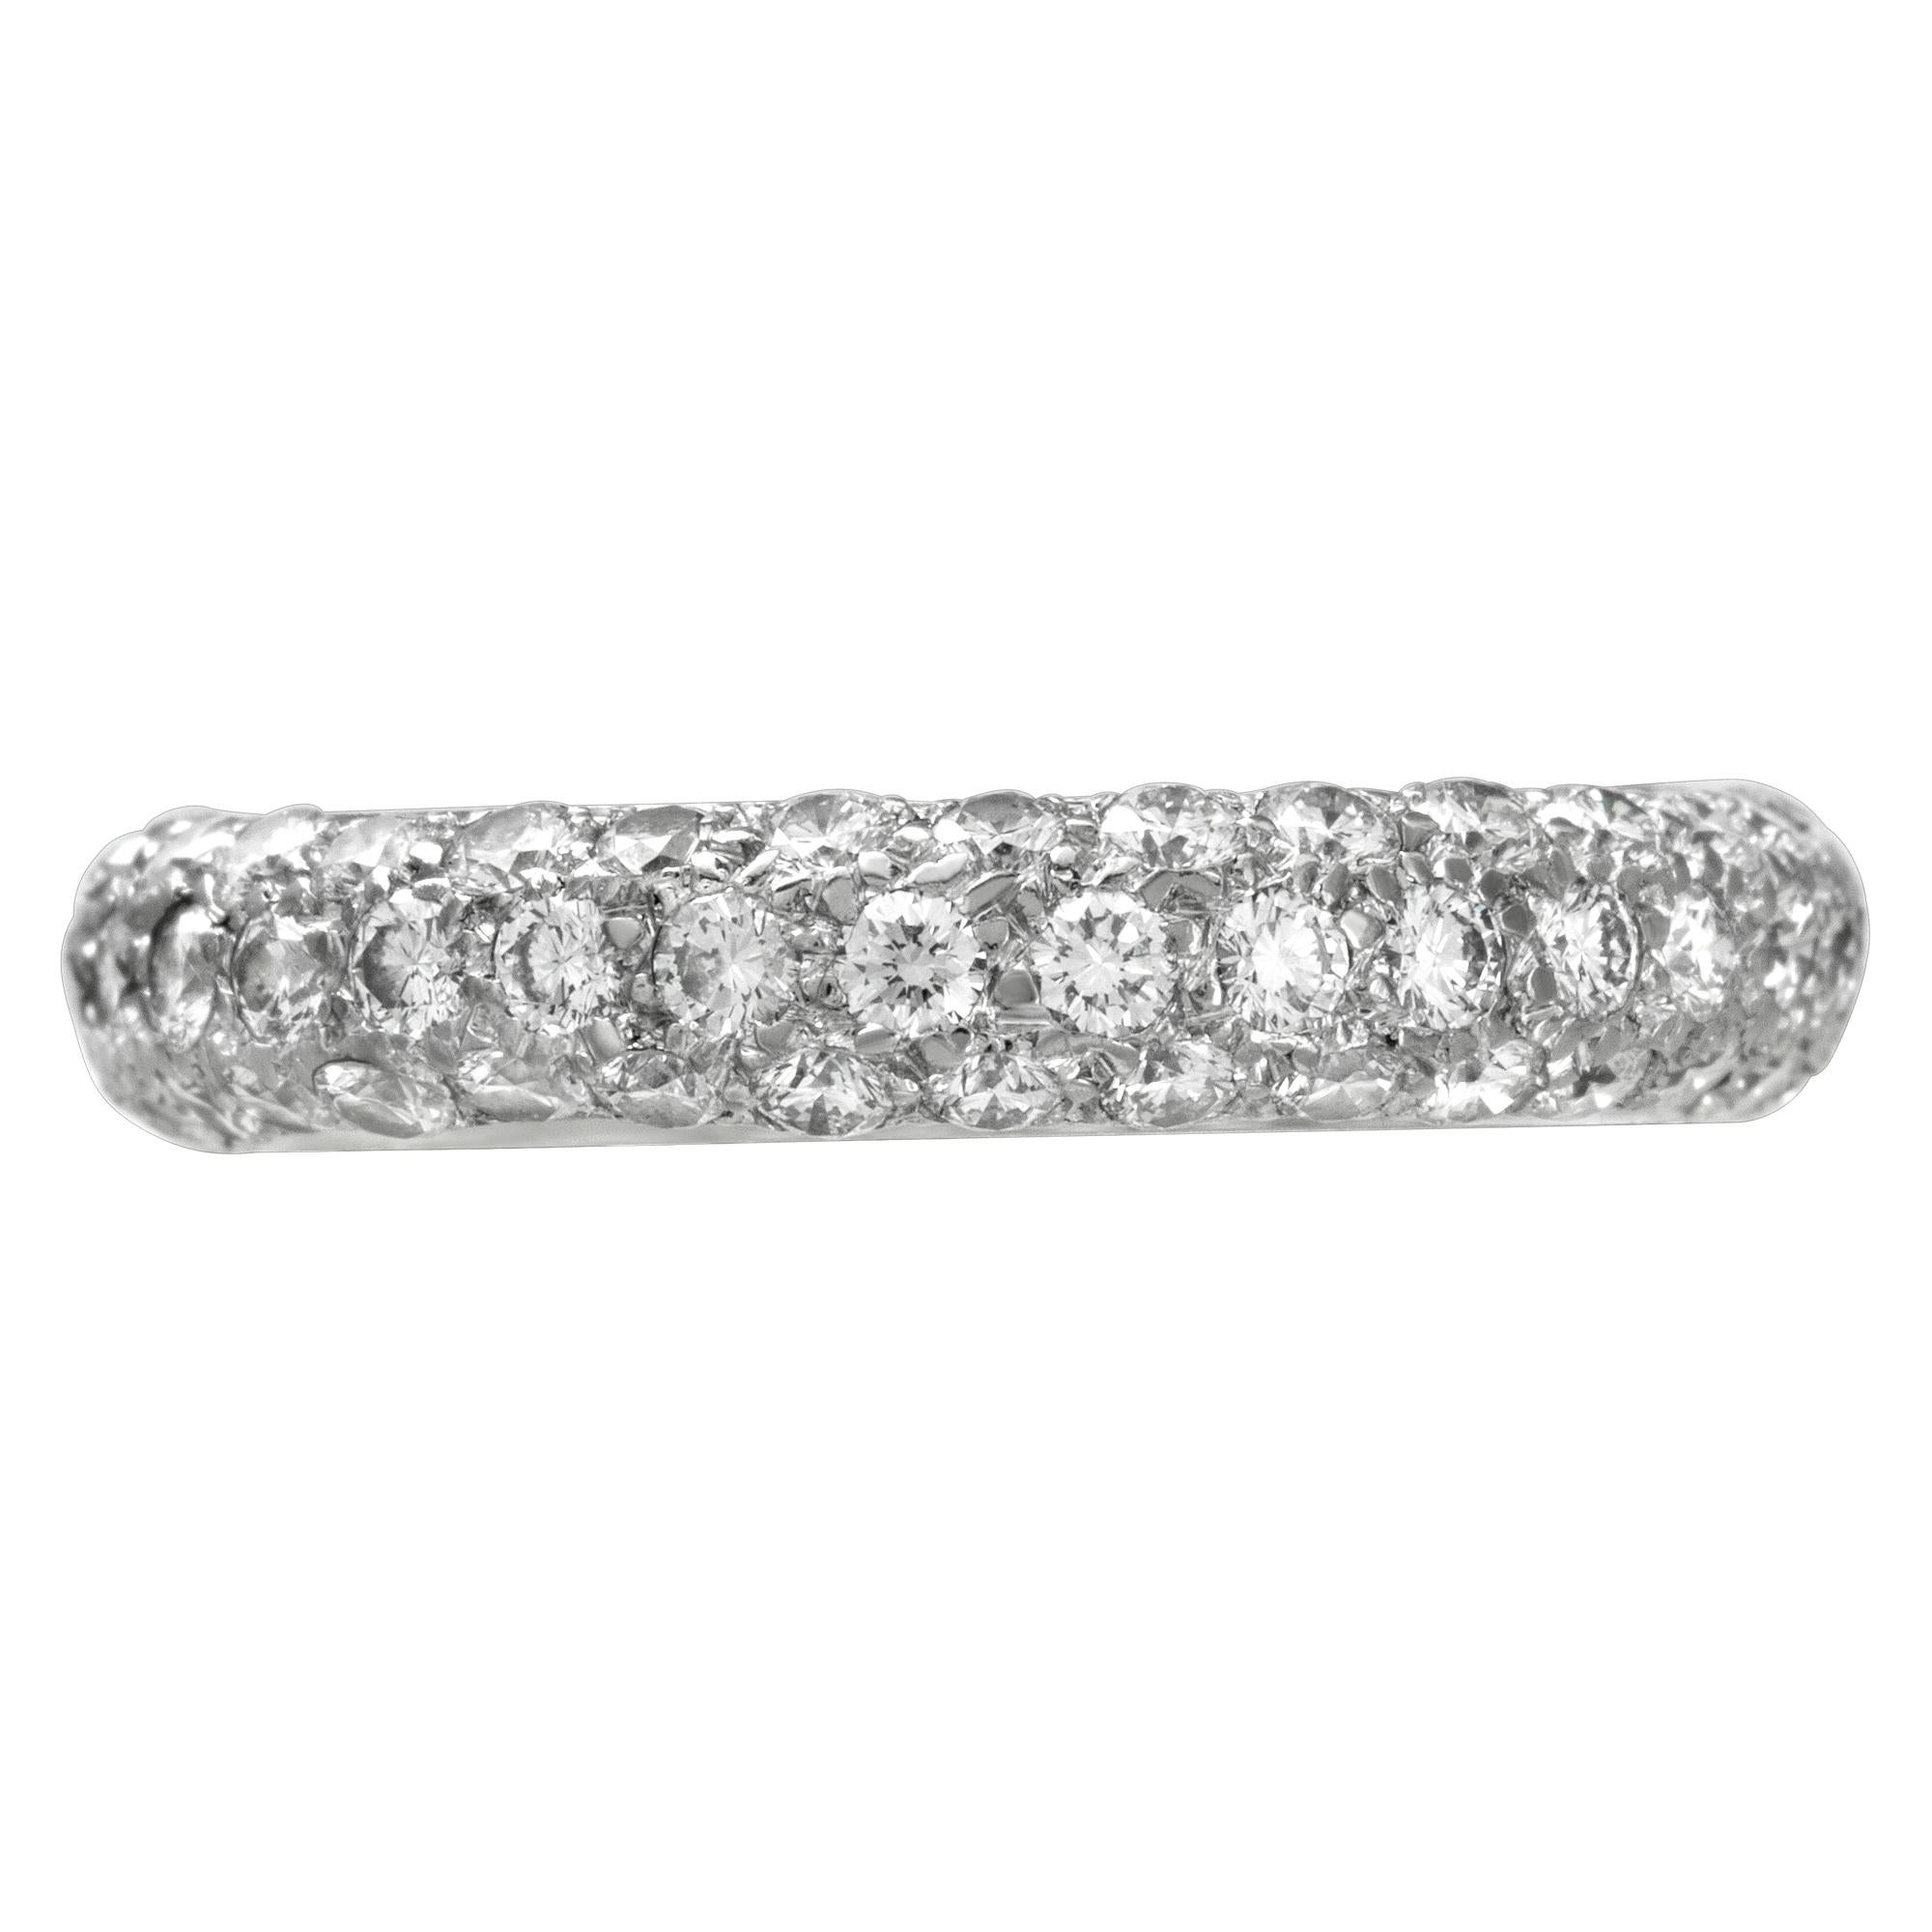 Chaumet eternity diamond band in 18k white gold with approx. 1.20 carats F-G color, VVS-VS clarity. Size 5.5This Chaumet ring is currently size 5.5 and some items can be sized up or down, please ask! It weighs 2.2 pennyweights and is 18k White Gold.
